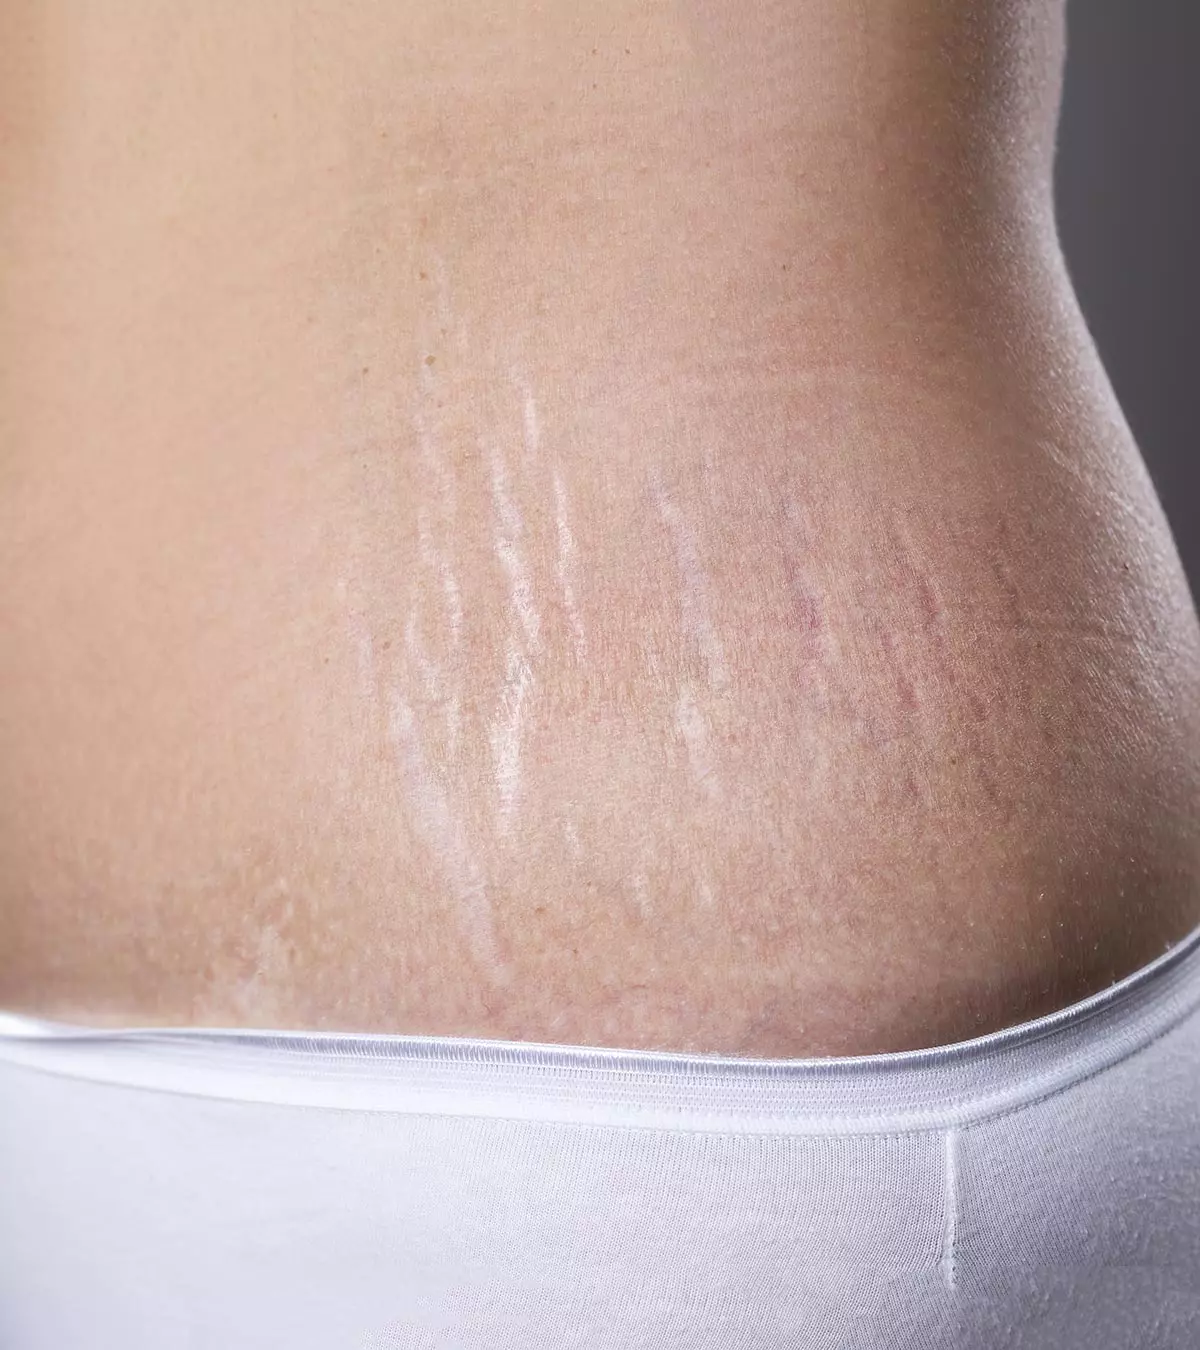 How To Remove Stretch Marks After Pregnancy 16 Home Remedies And Medical Treatments